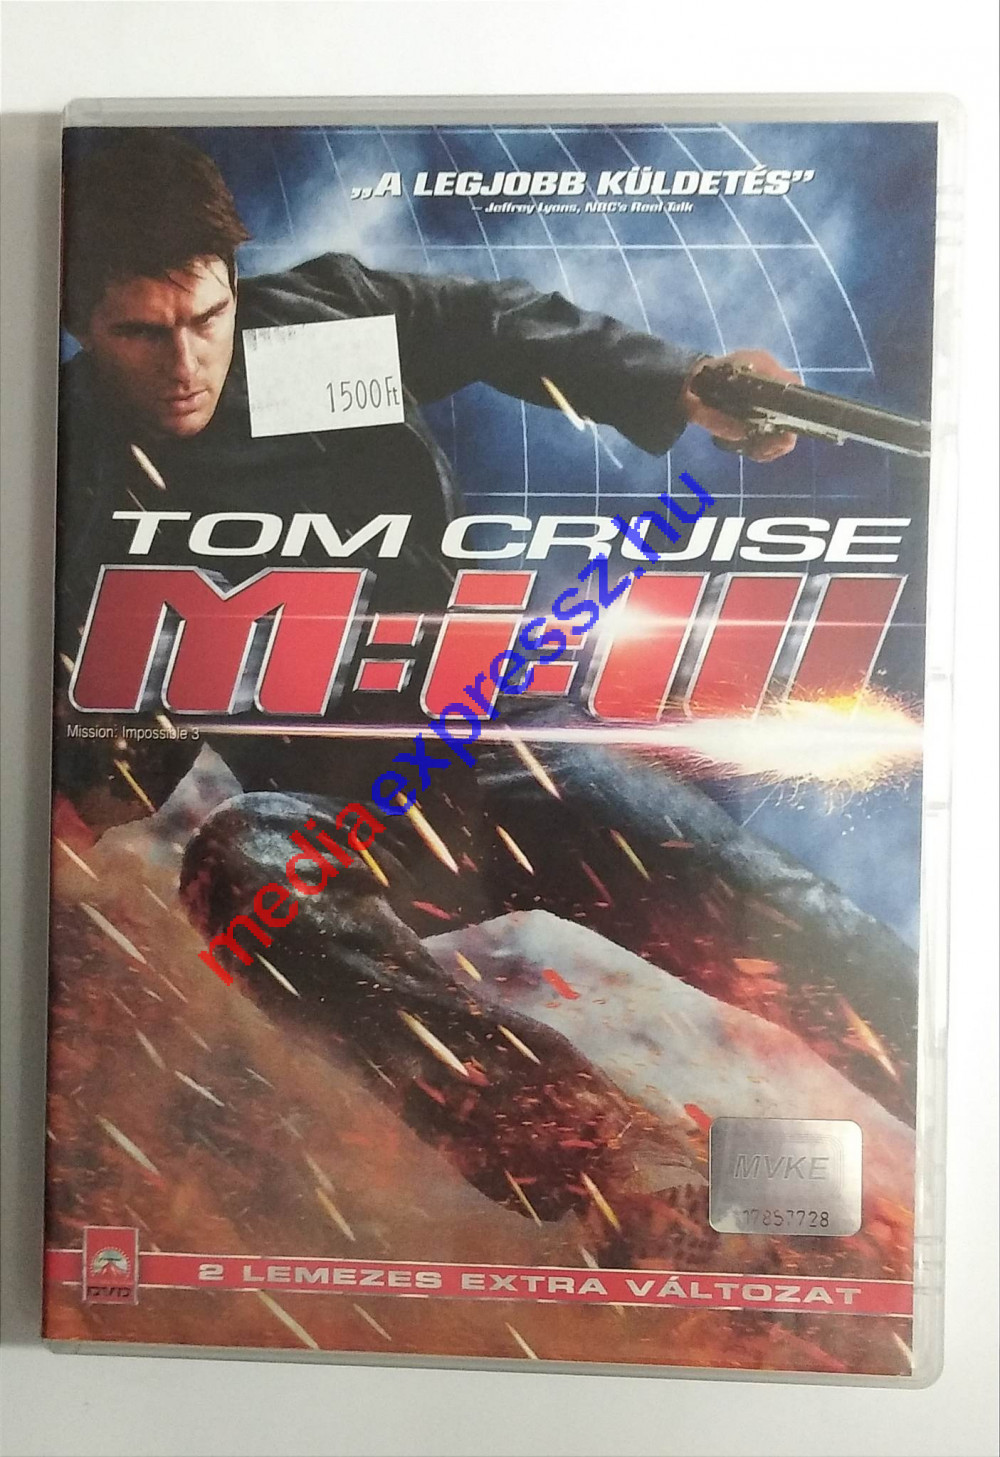 Mission impossible III DVD